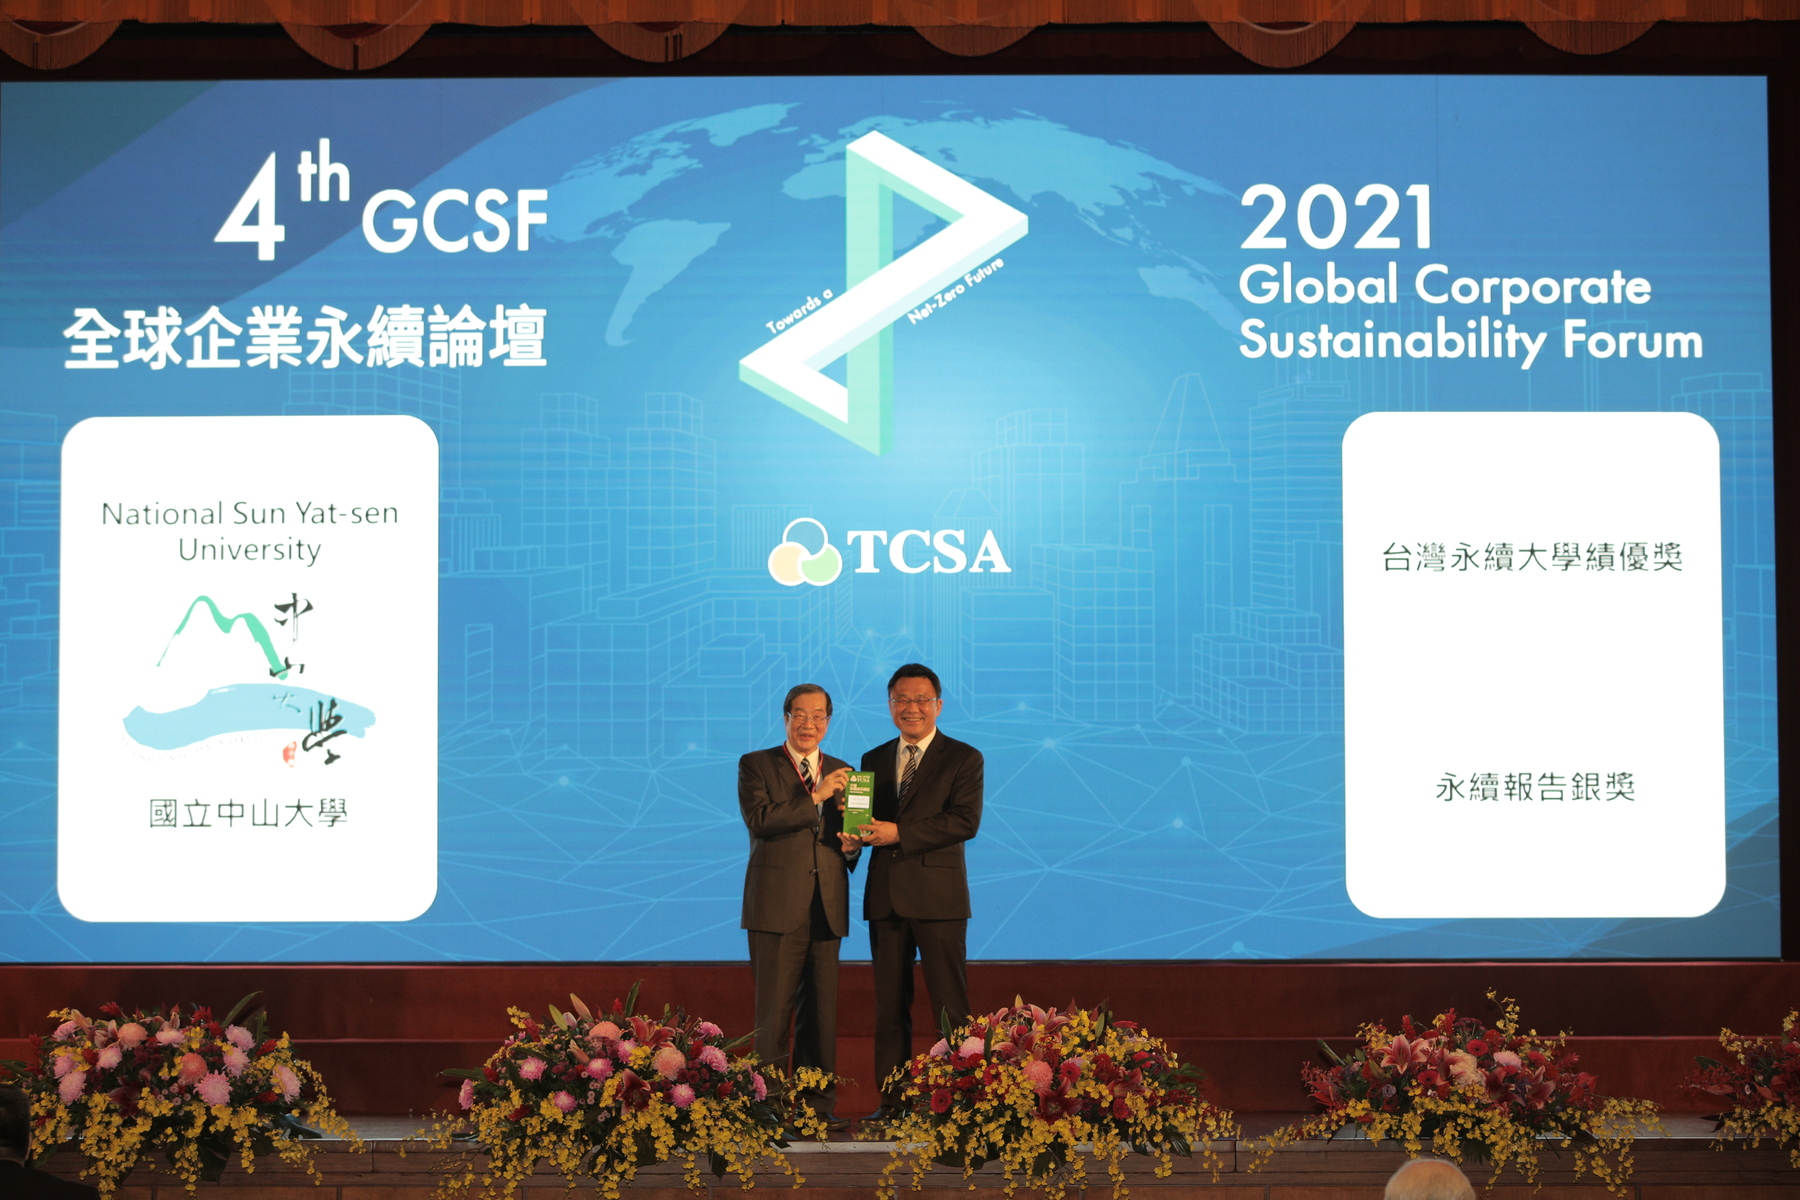 The awards were conferred in a ceremony to NSYSU’s Senior Vice President I-Yu Huang (on the right) by the President of the Examination Yuan Jong-Tsun Huang (on the left). (Photo provided by TCSA)